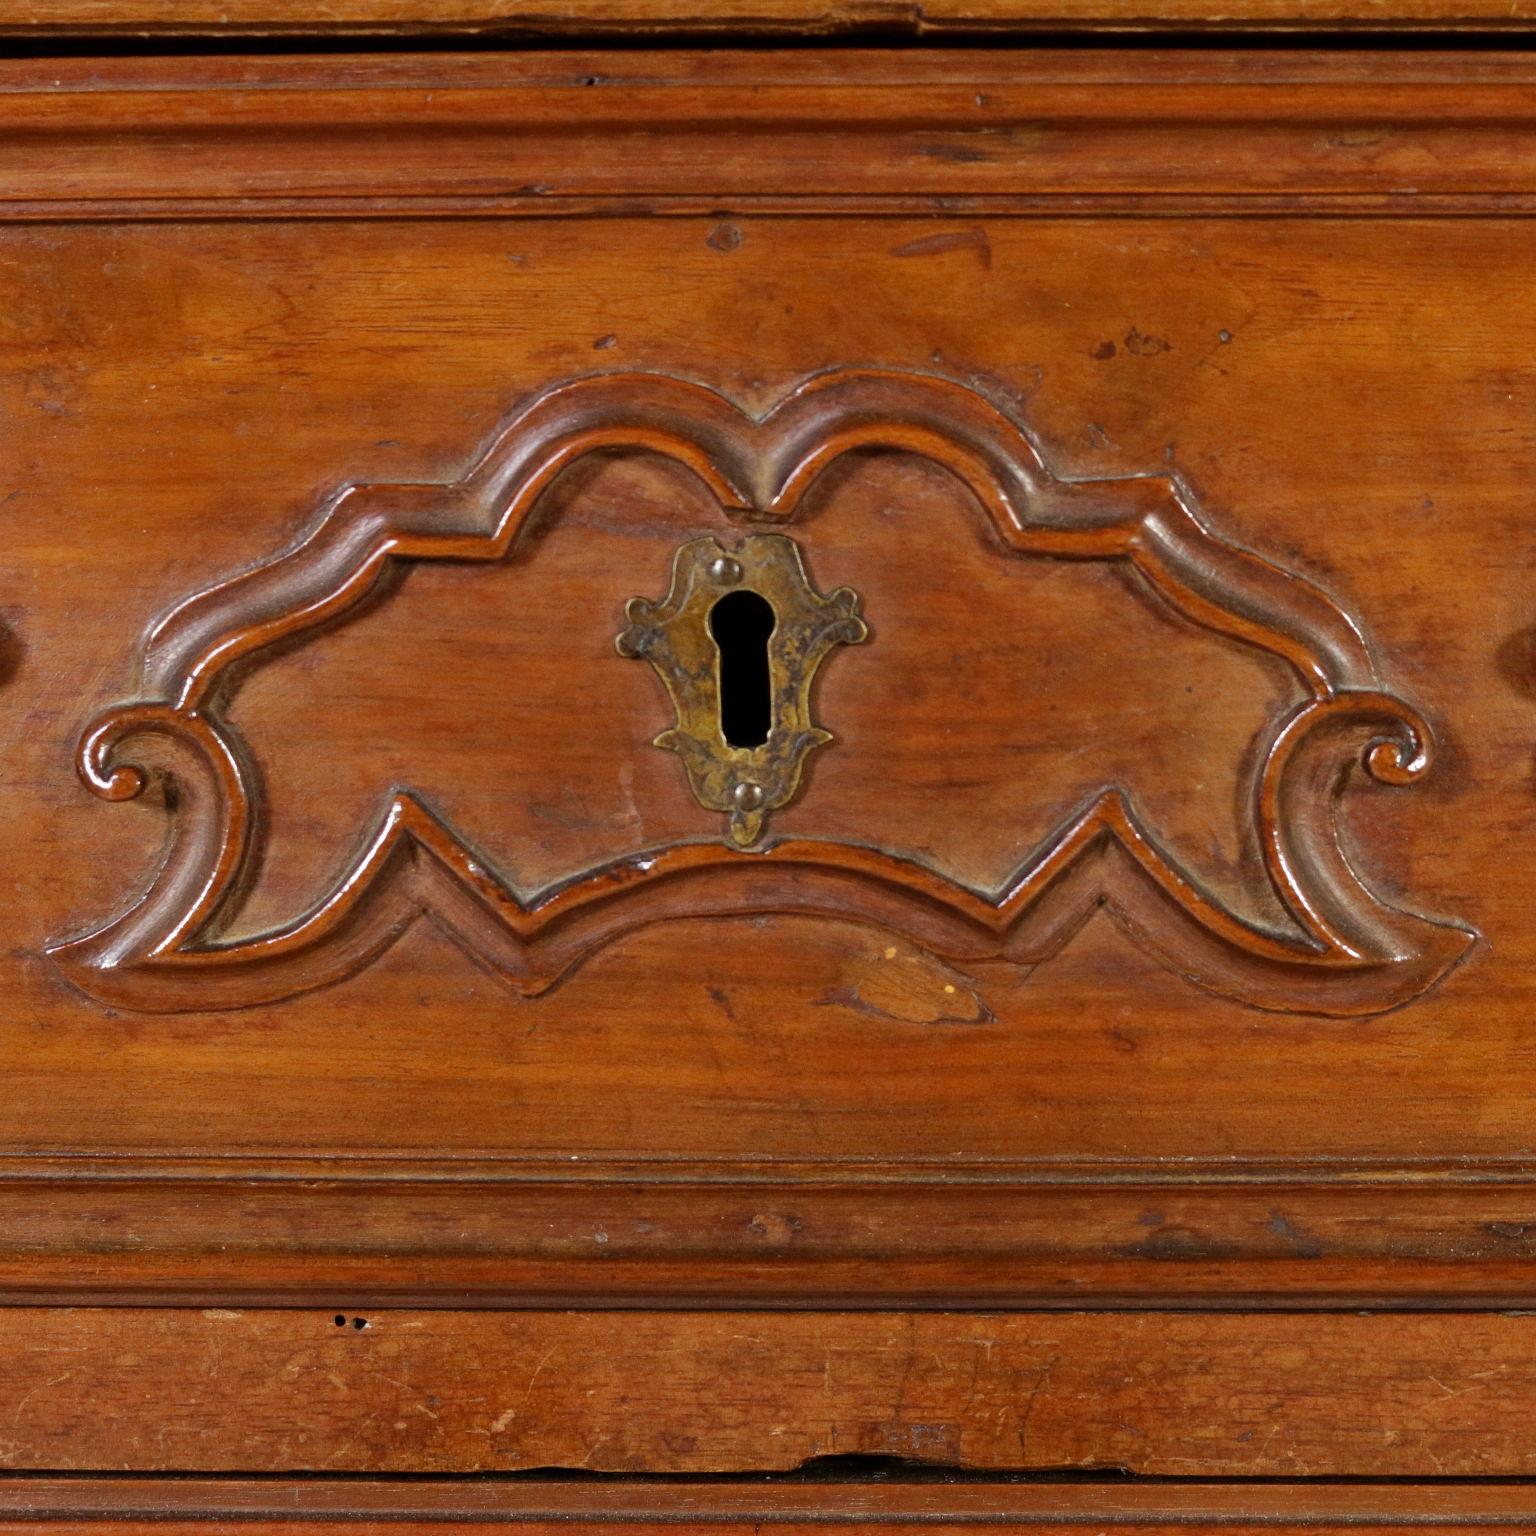 Italian Chest of Drawers Walnut Manufactured in Northern Italy, Early 1700